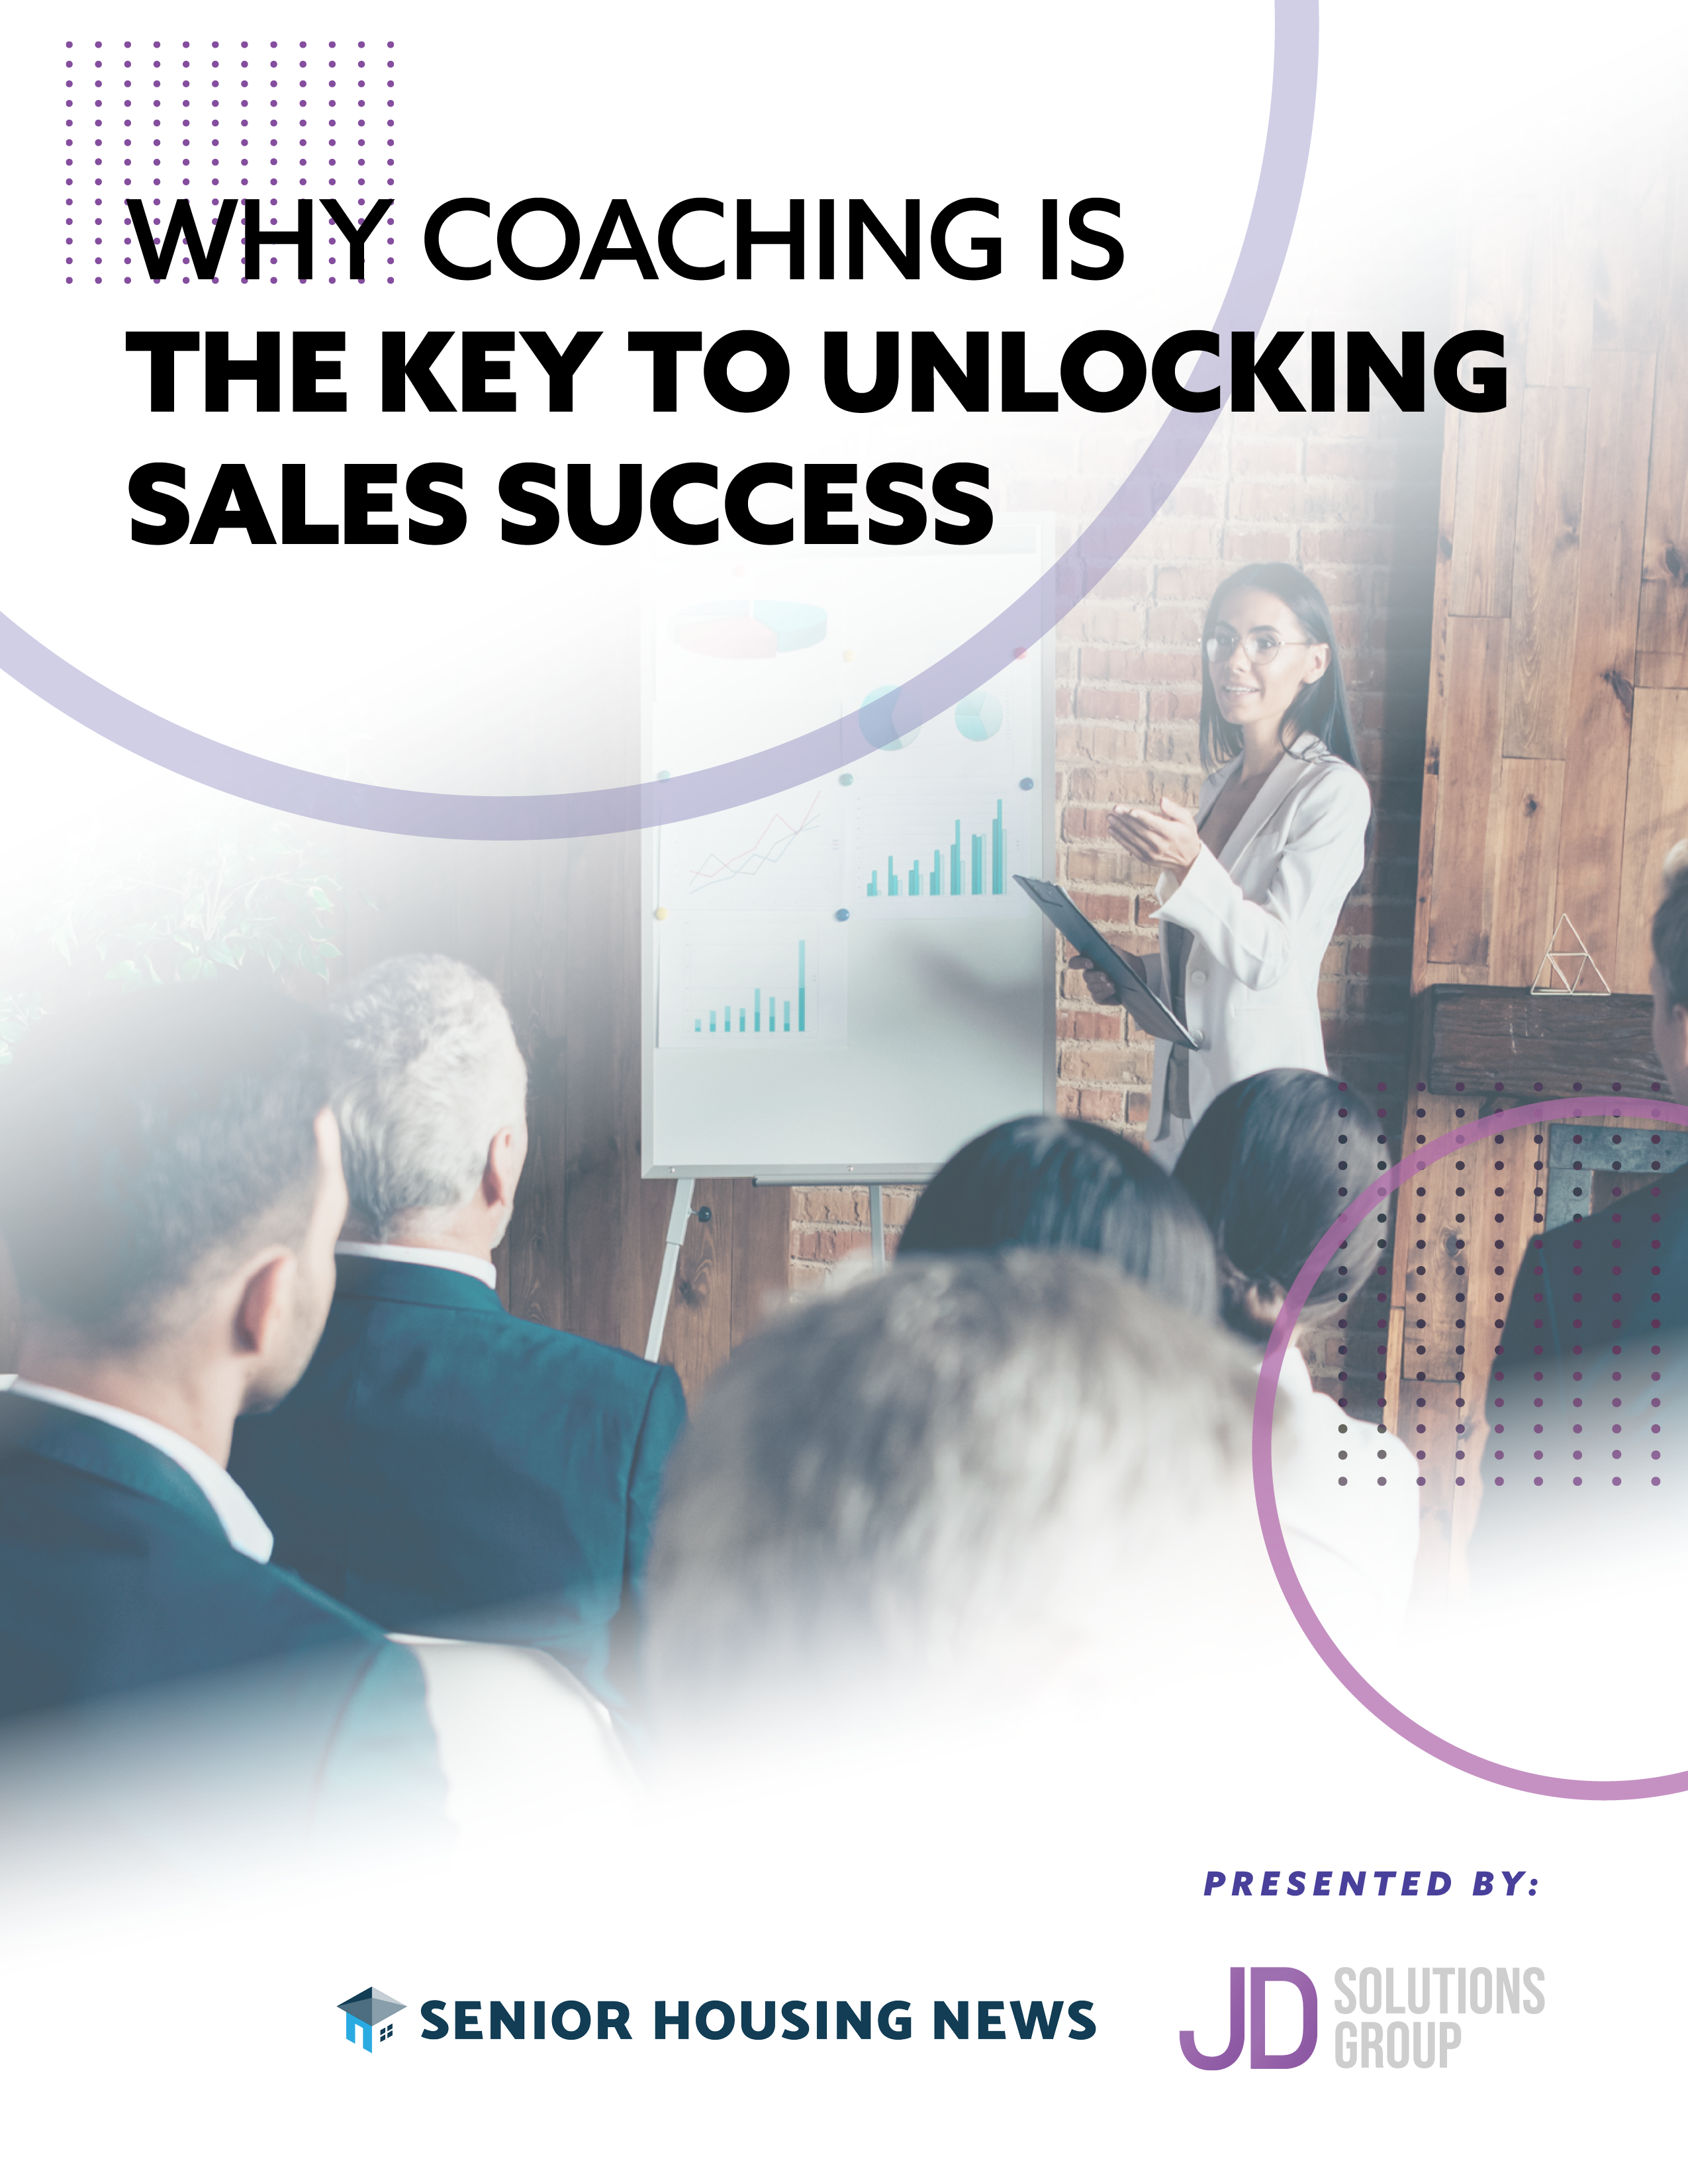 Why Coaching is the Key to Unlocking Sales Success